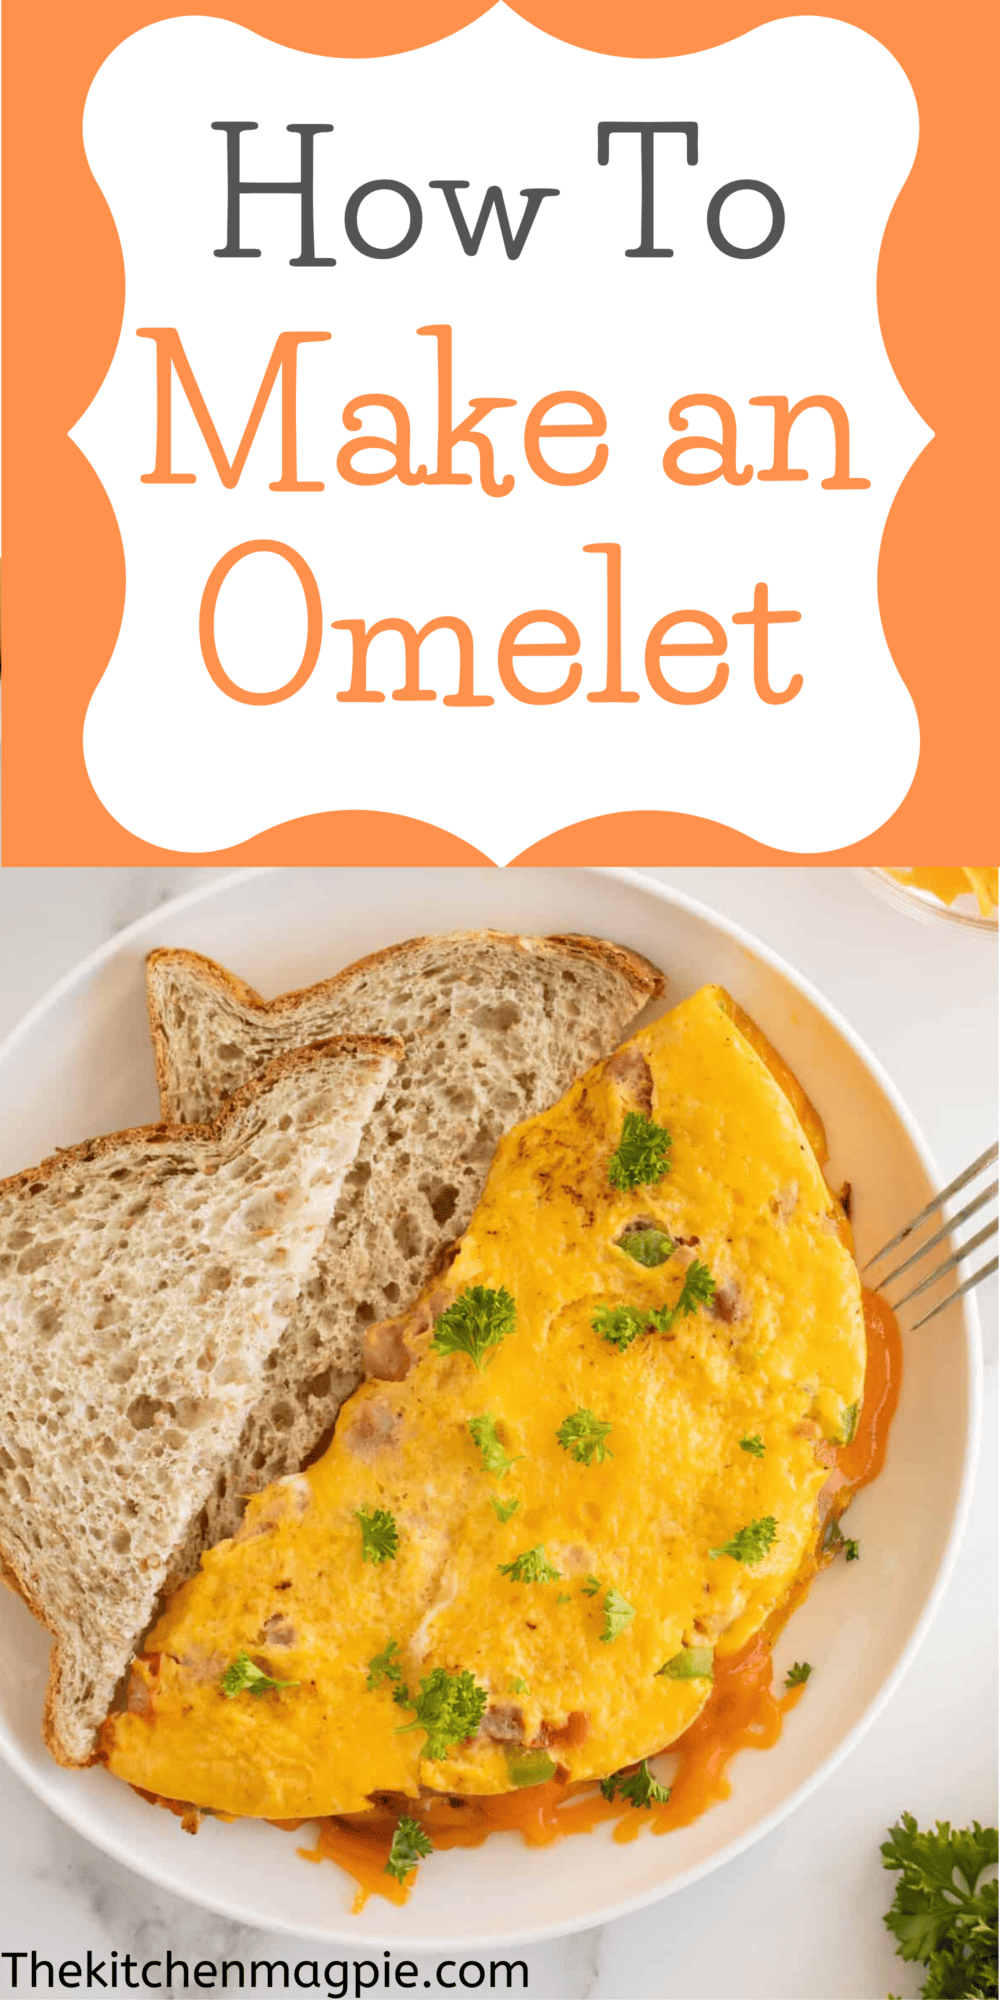 Easy directions on how to make an omelet filled with your favorite ingredients